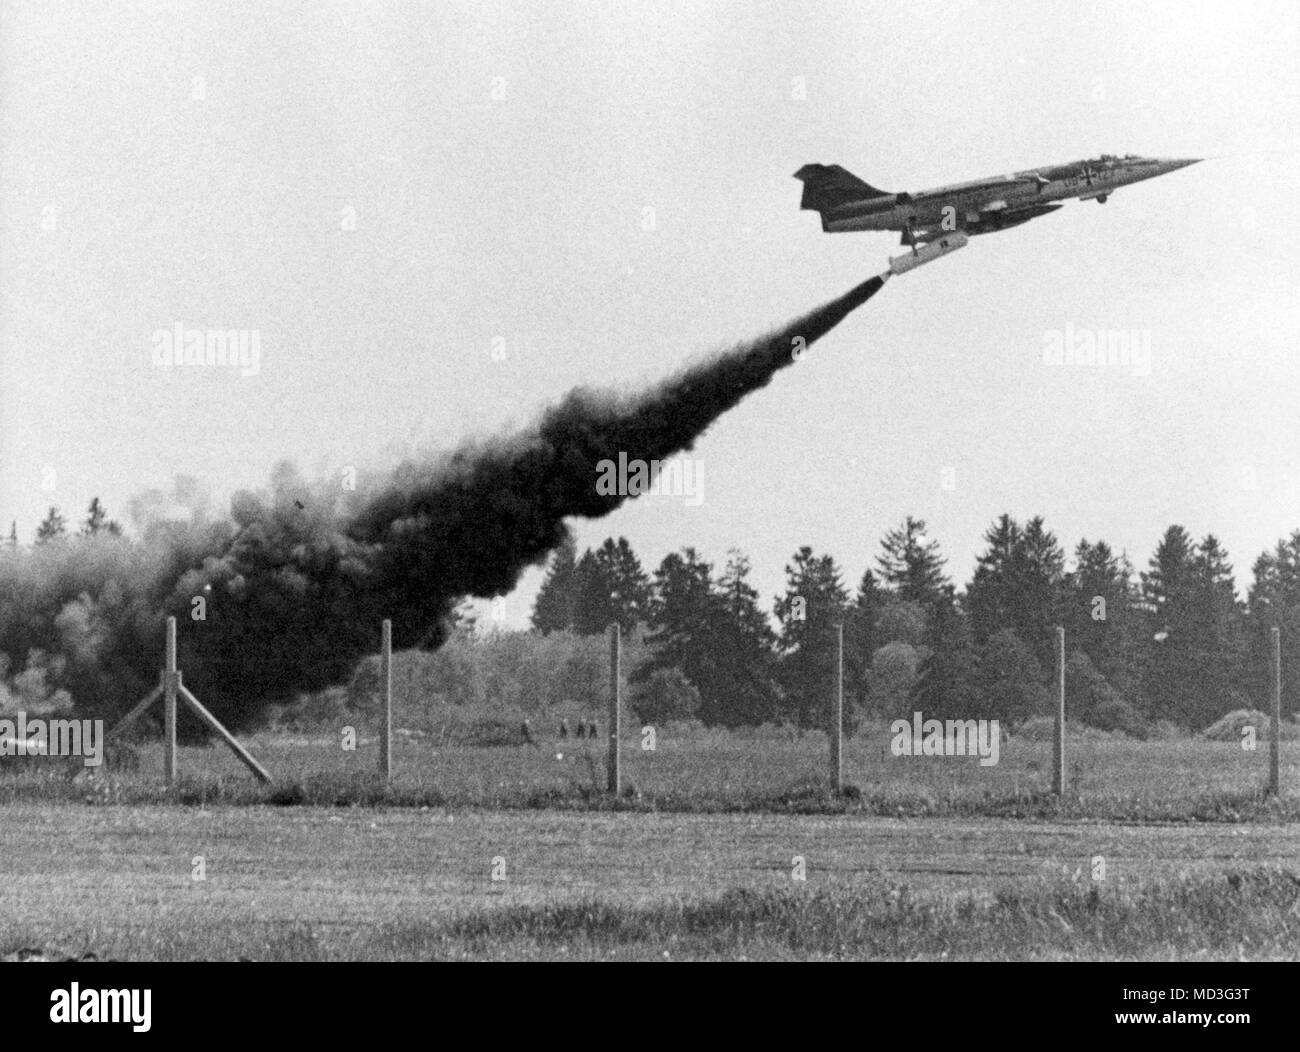 The rocket starfighter shortly after the start on 18.05.1966 on the airbase in the Bavarian camp Heel. The burned rocket under the machine is dropped after a full circle over the launch area. In front of 100 journalists, photographers and cameramen, the first rocket-launched Starfighter F 104 G was demonstrated on 18.05.1966 at the Bundeswehr airfield Lagerlechfeld near Augsburg. Underneath ear-droning drones, trailing behind a massive smoke tail, the starfighter lifted off from the launch pad mounted in a concrete bucket. In the cockpit sat the American test pilot Ed Brown. The rocket weighs Stock Photo